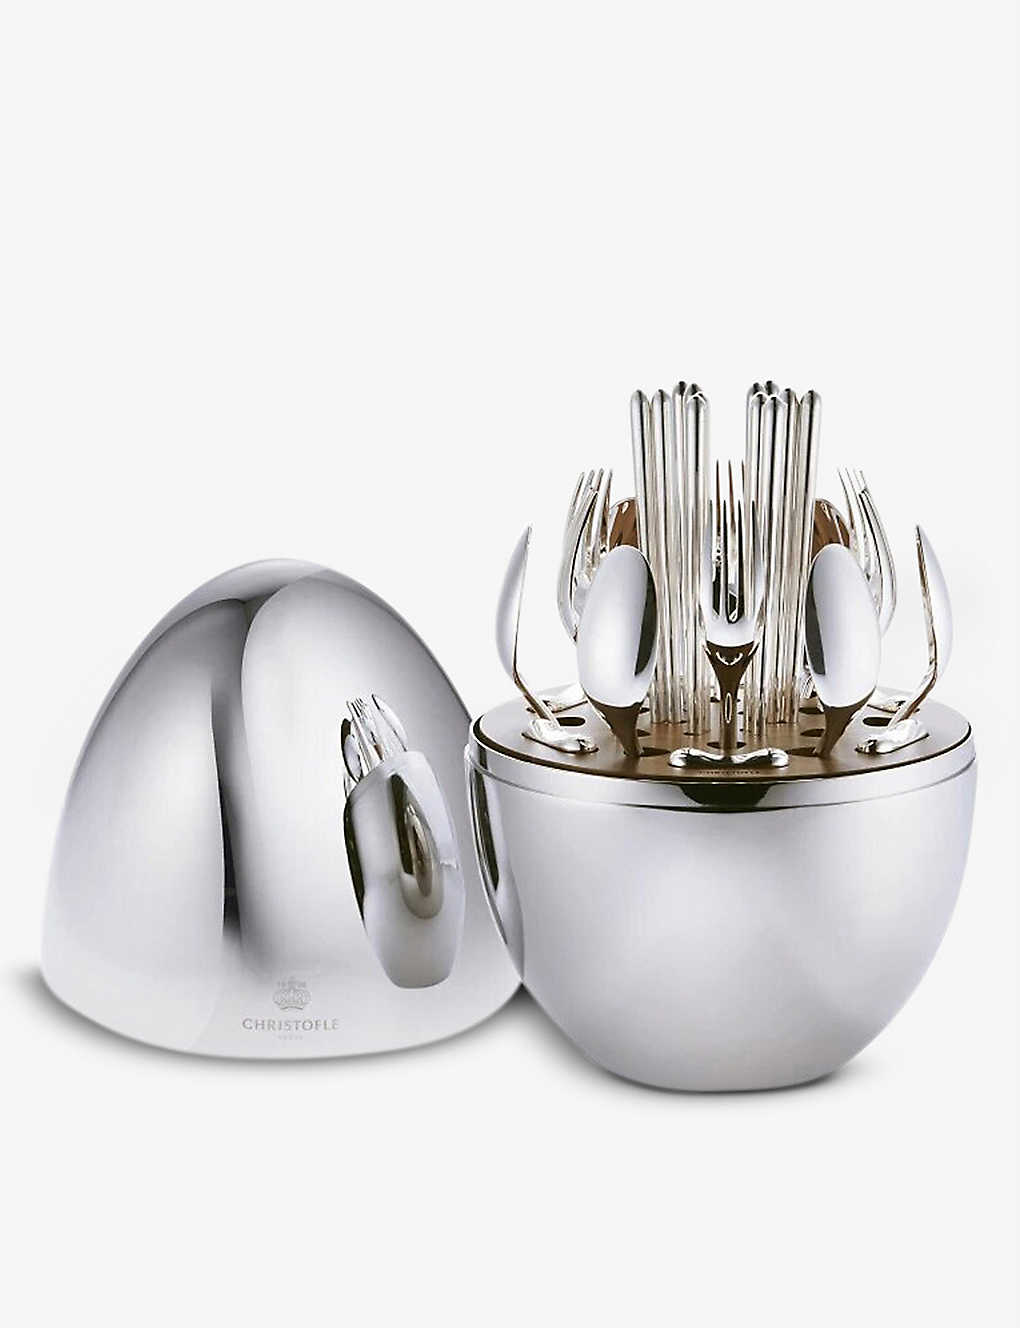 Christofle Mood Asia Silver-plated Stainless-steel Cutlery Set Of 24